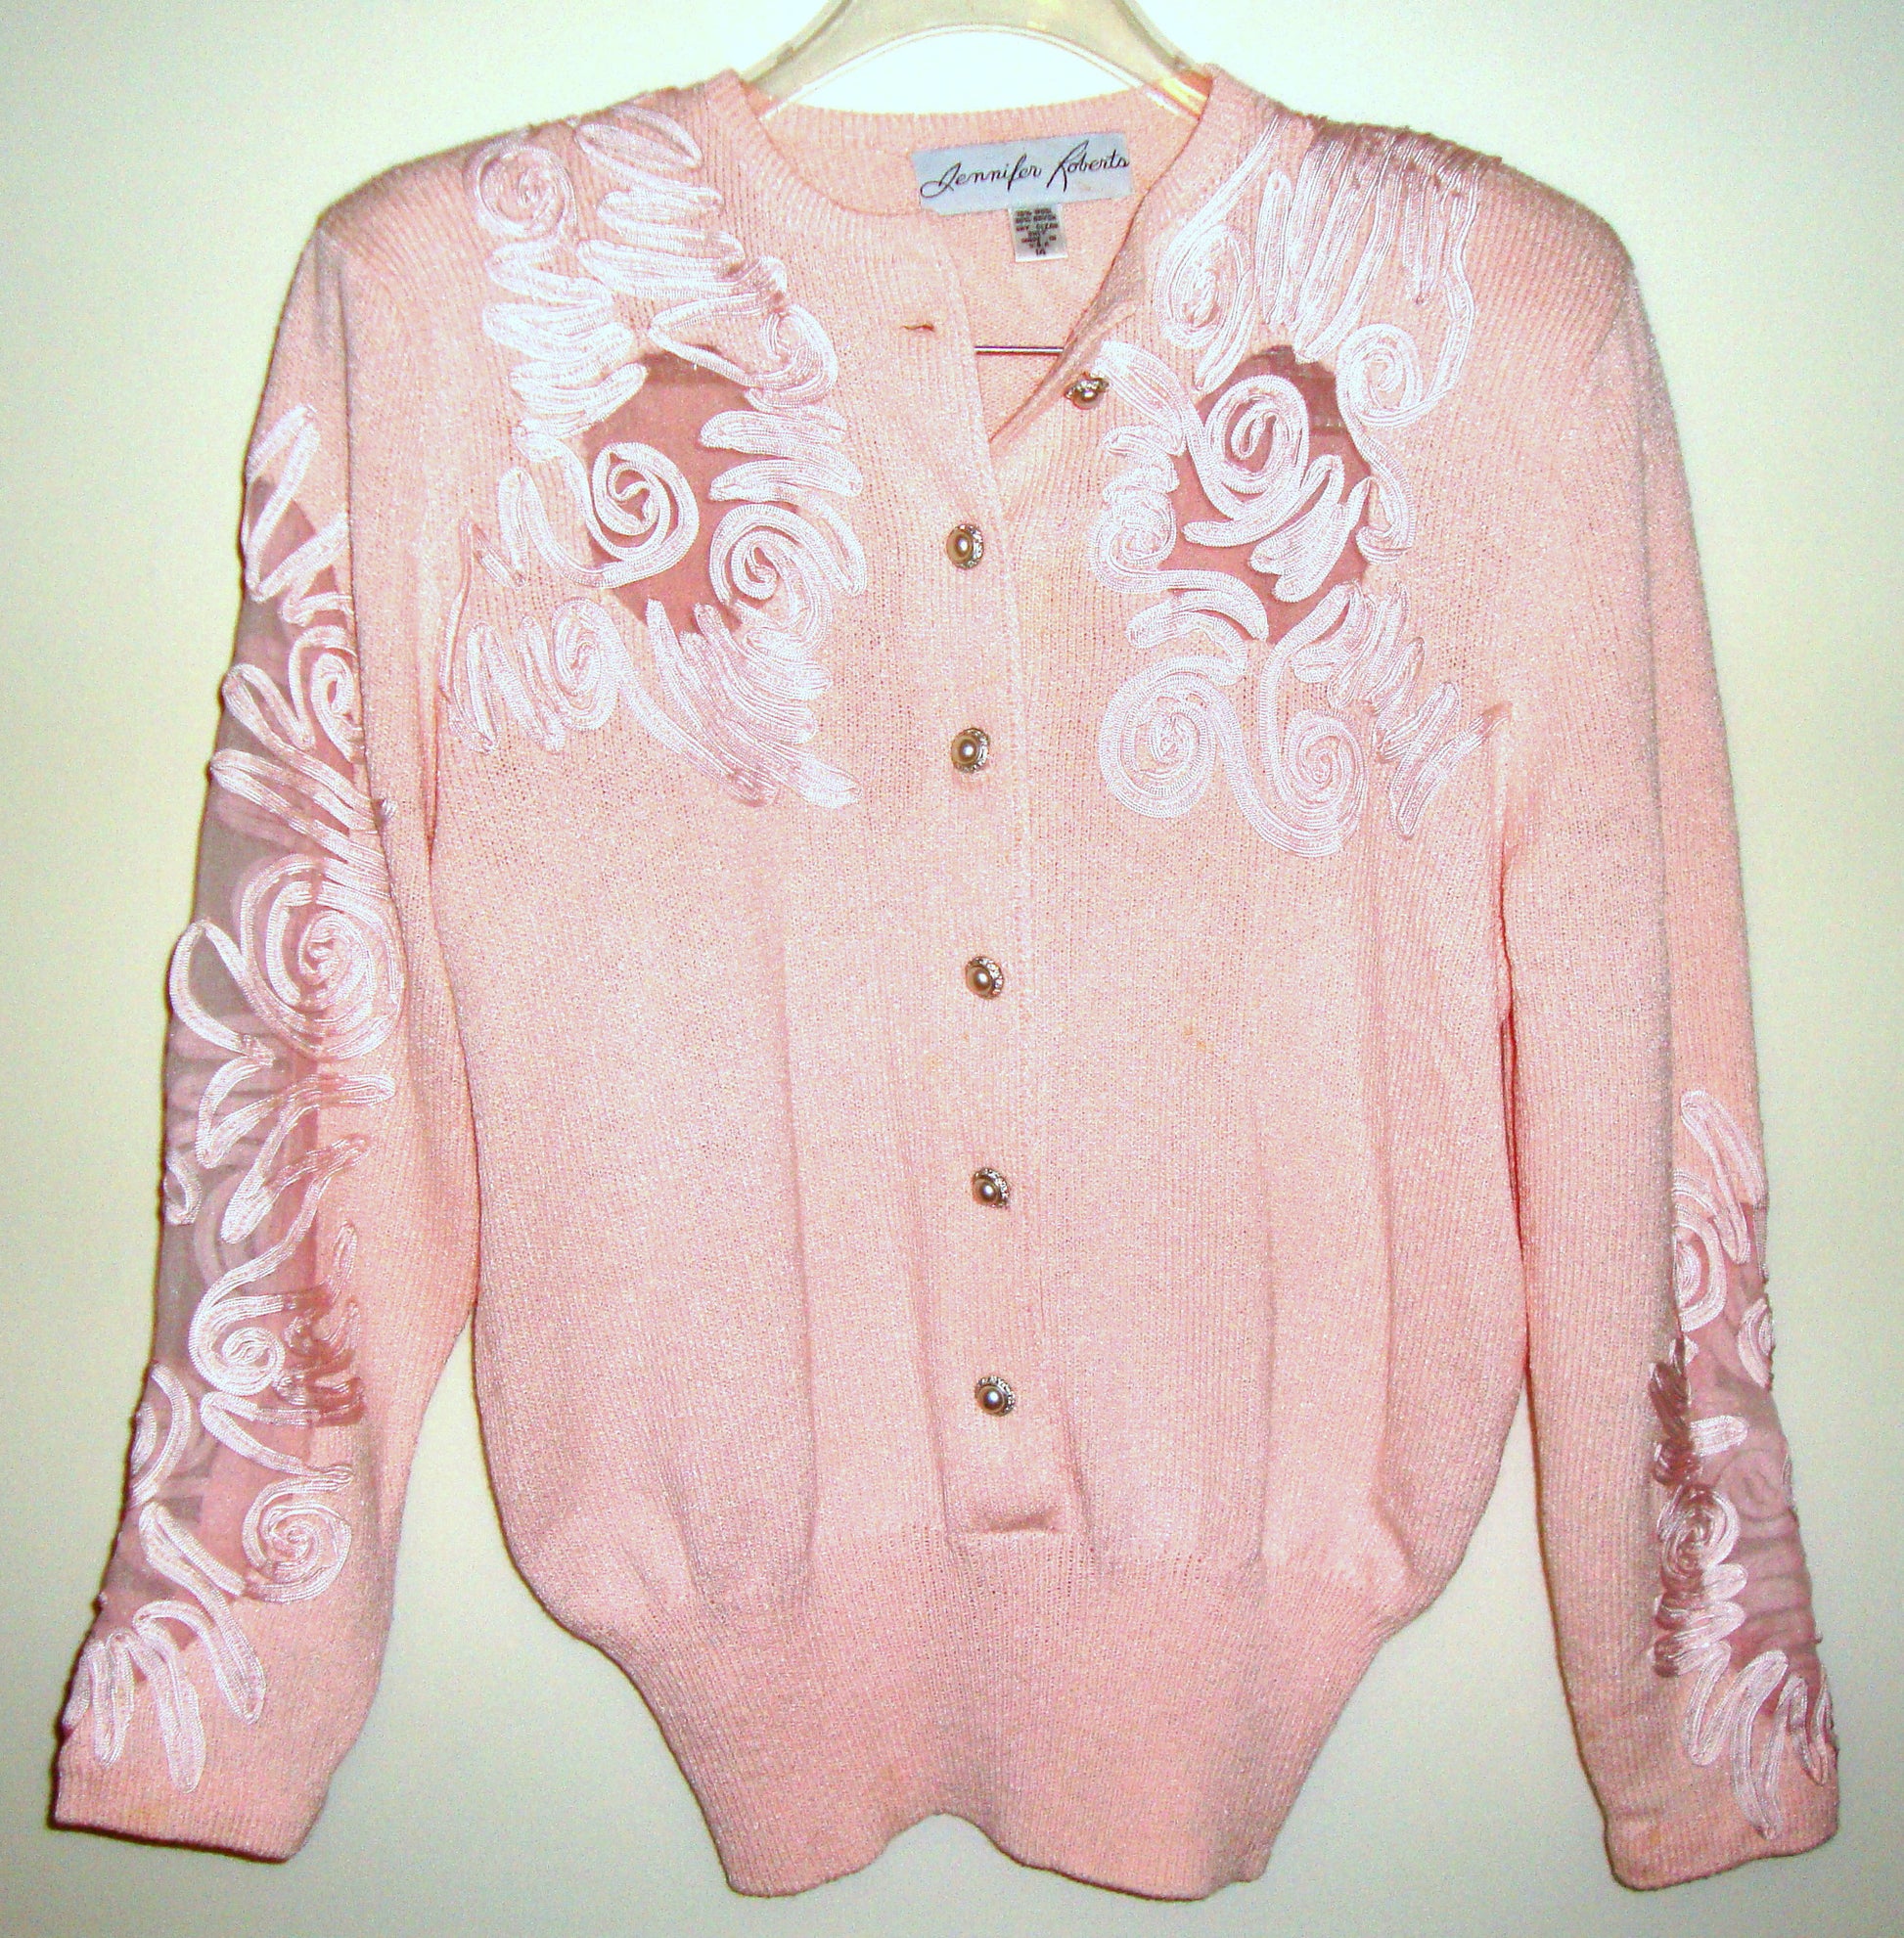 Vintage JENNIFER ROBERTS Embroidered Rhinestone Sweater Pearl Buttons Abby Essie